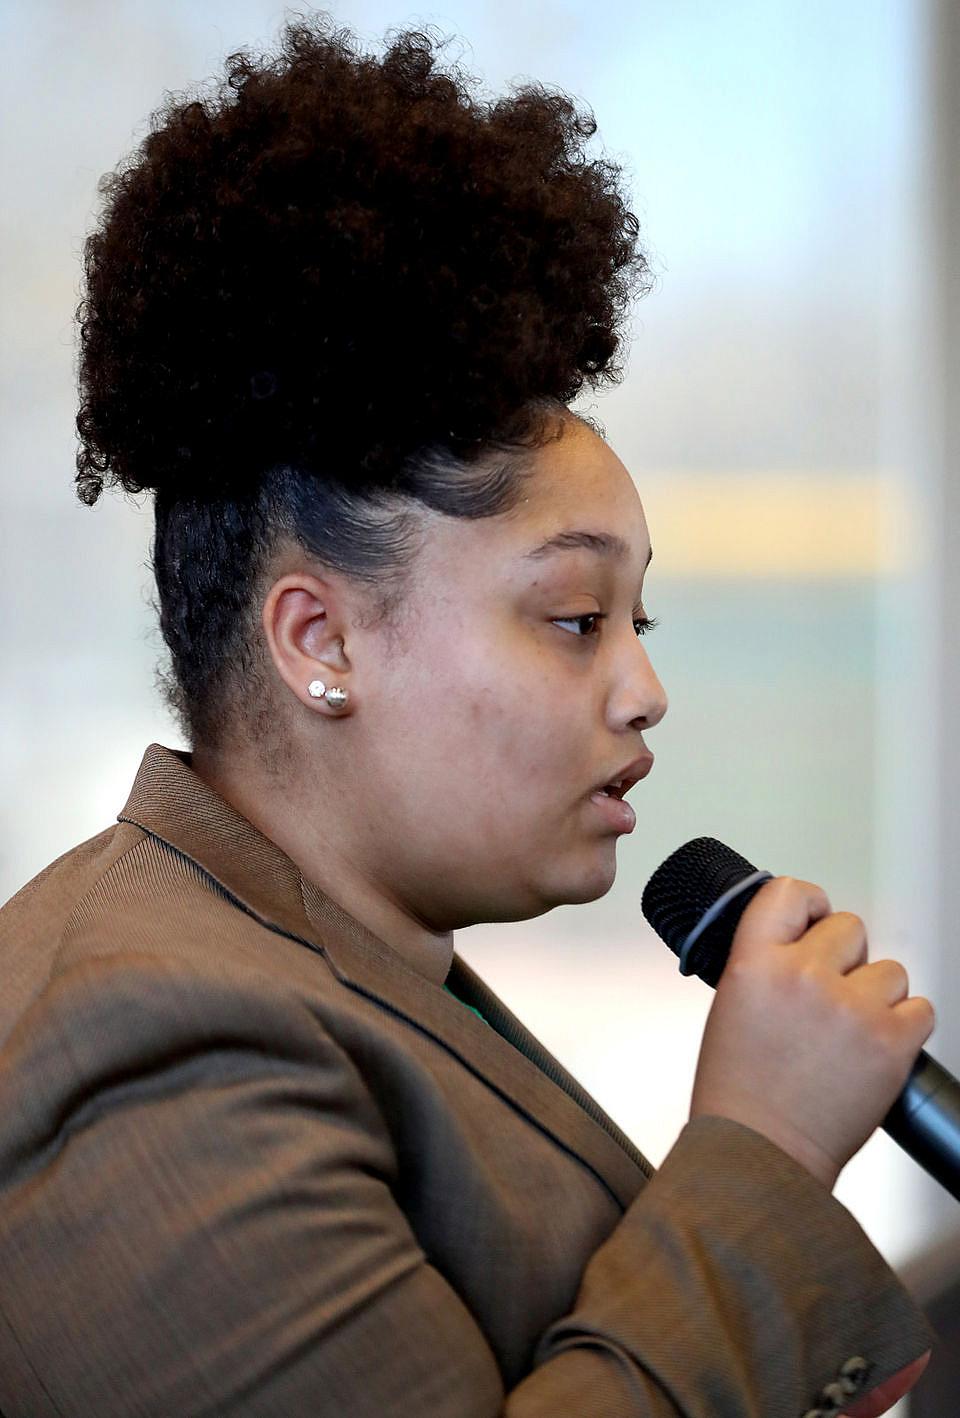 Corrin Cooper, 16, speaks to various leaders in the community at League Park in Cleveland, OH, Monday, April 30, 2018. Cooper is